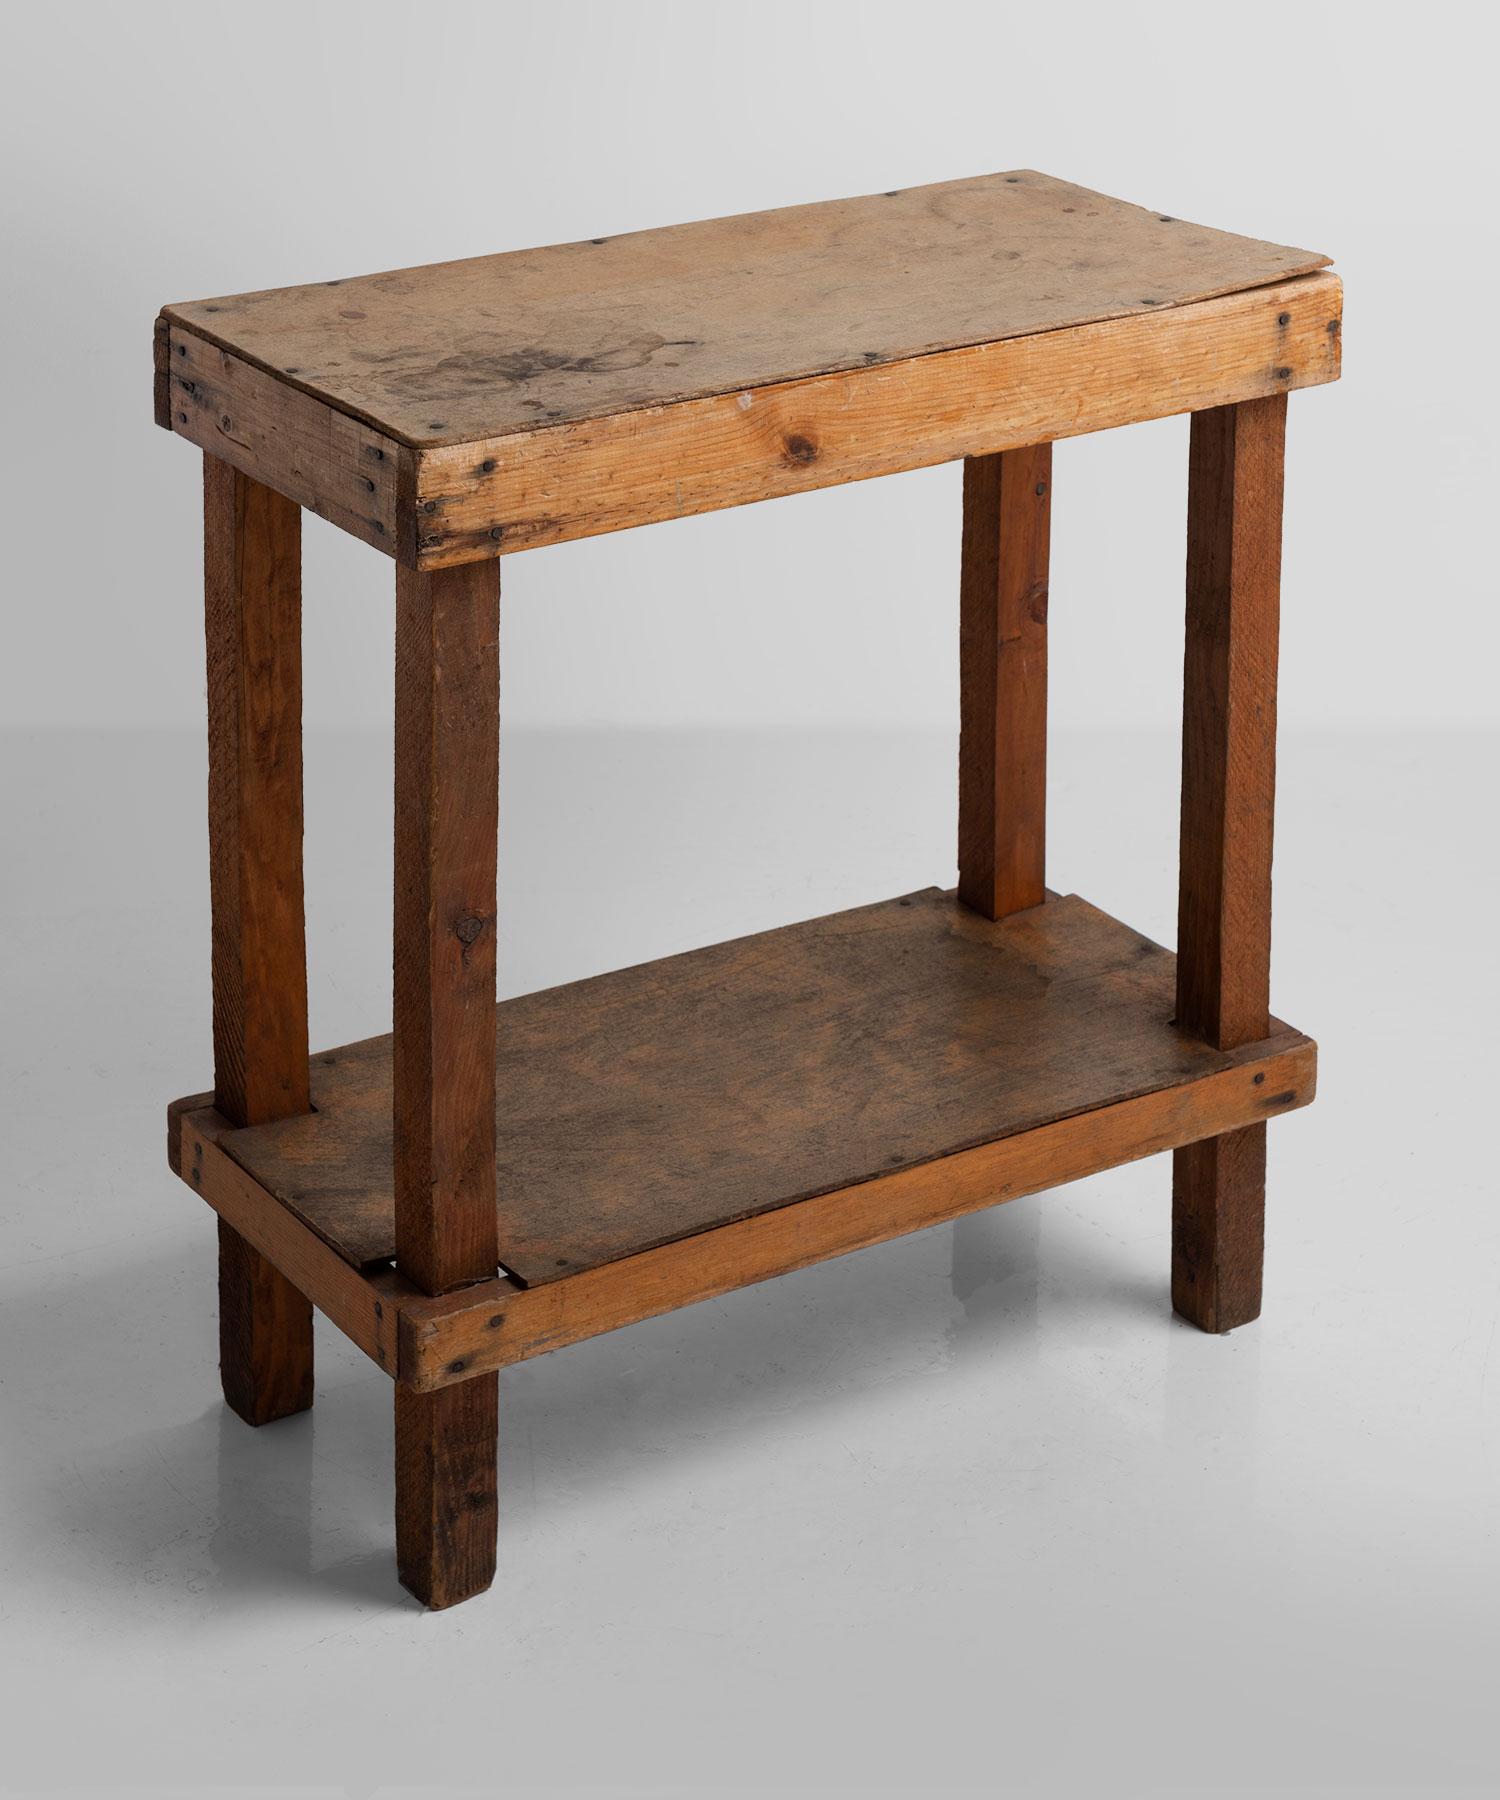 Primitive pine side table, America, circa 1900

Simple form side table constructed in pine.